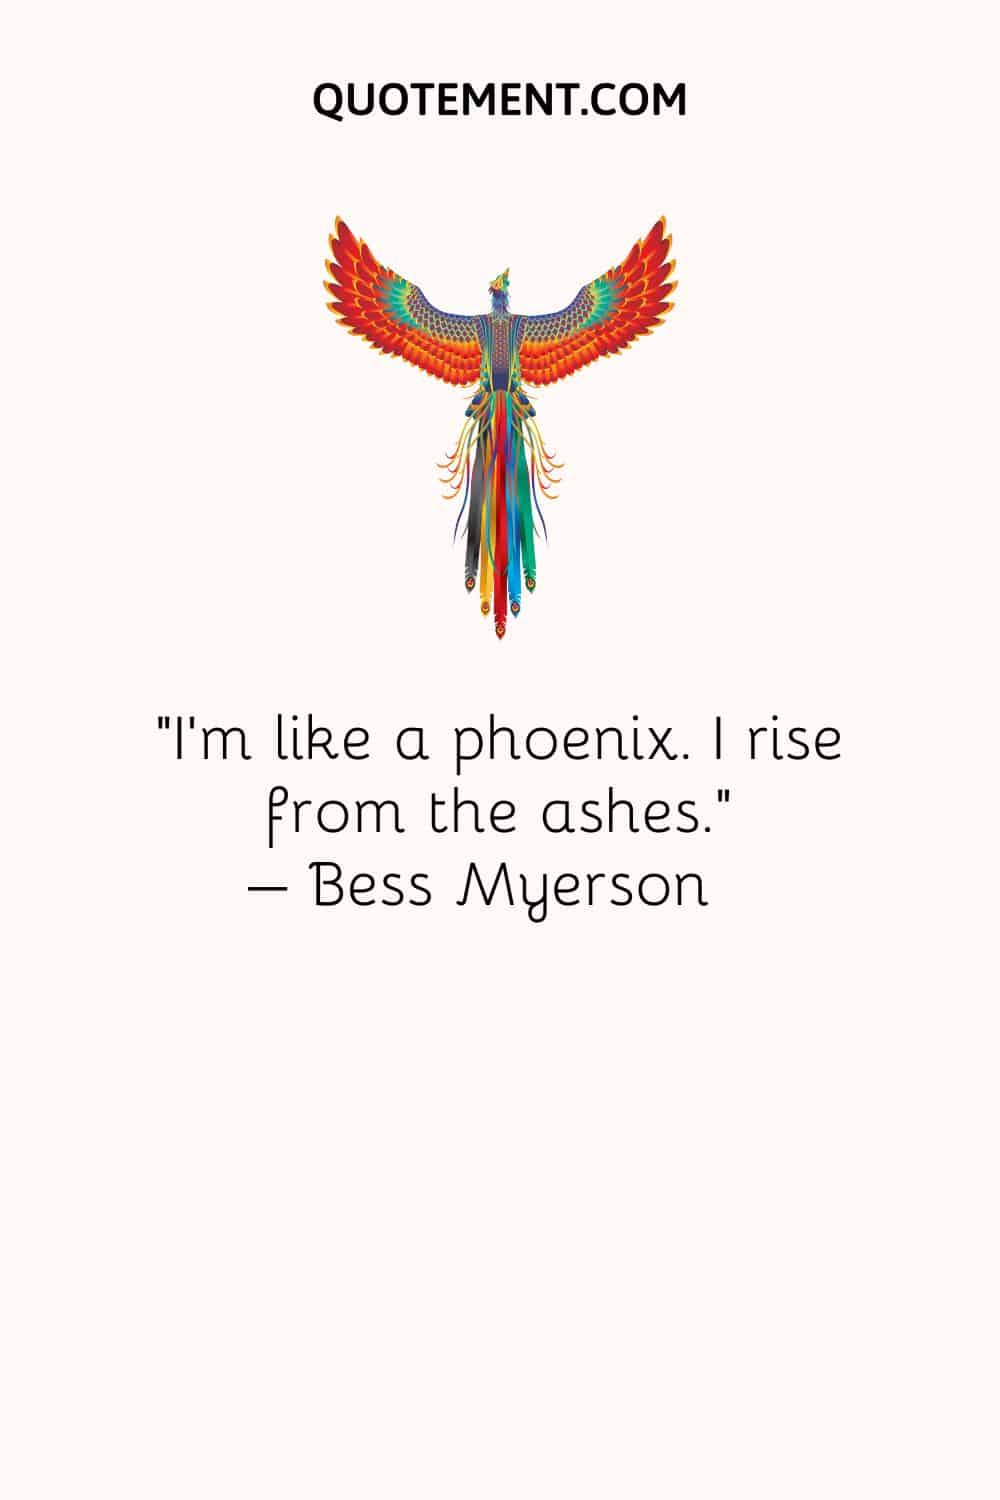 Illustration representing inspirational rising phoenix quote and a phoenix.